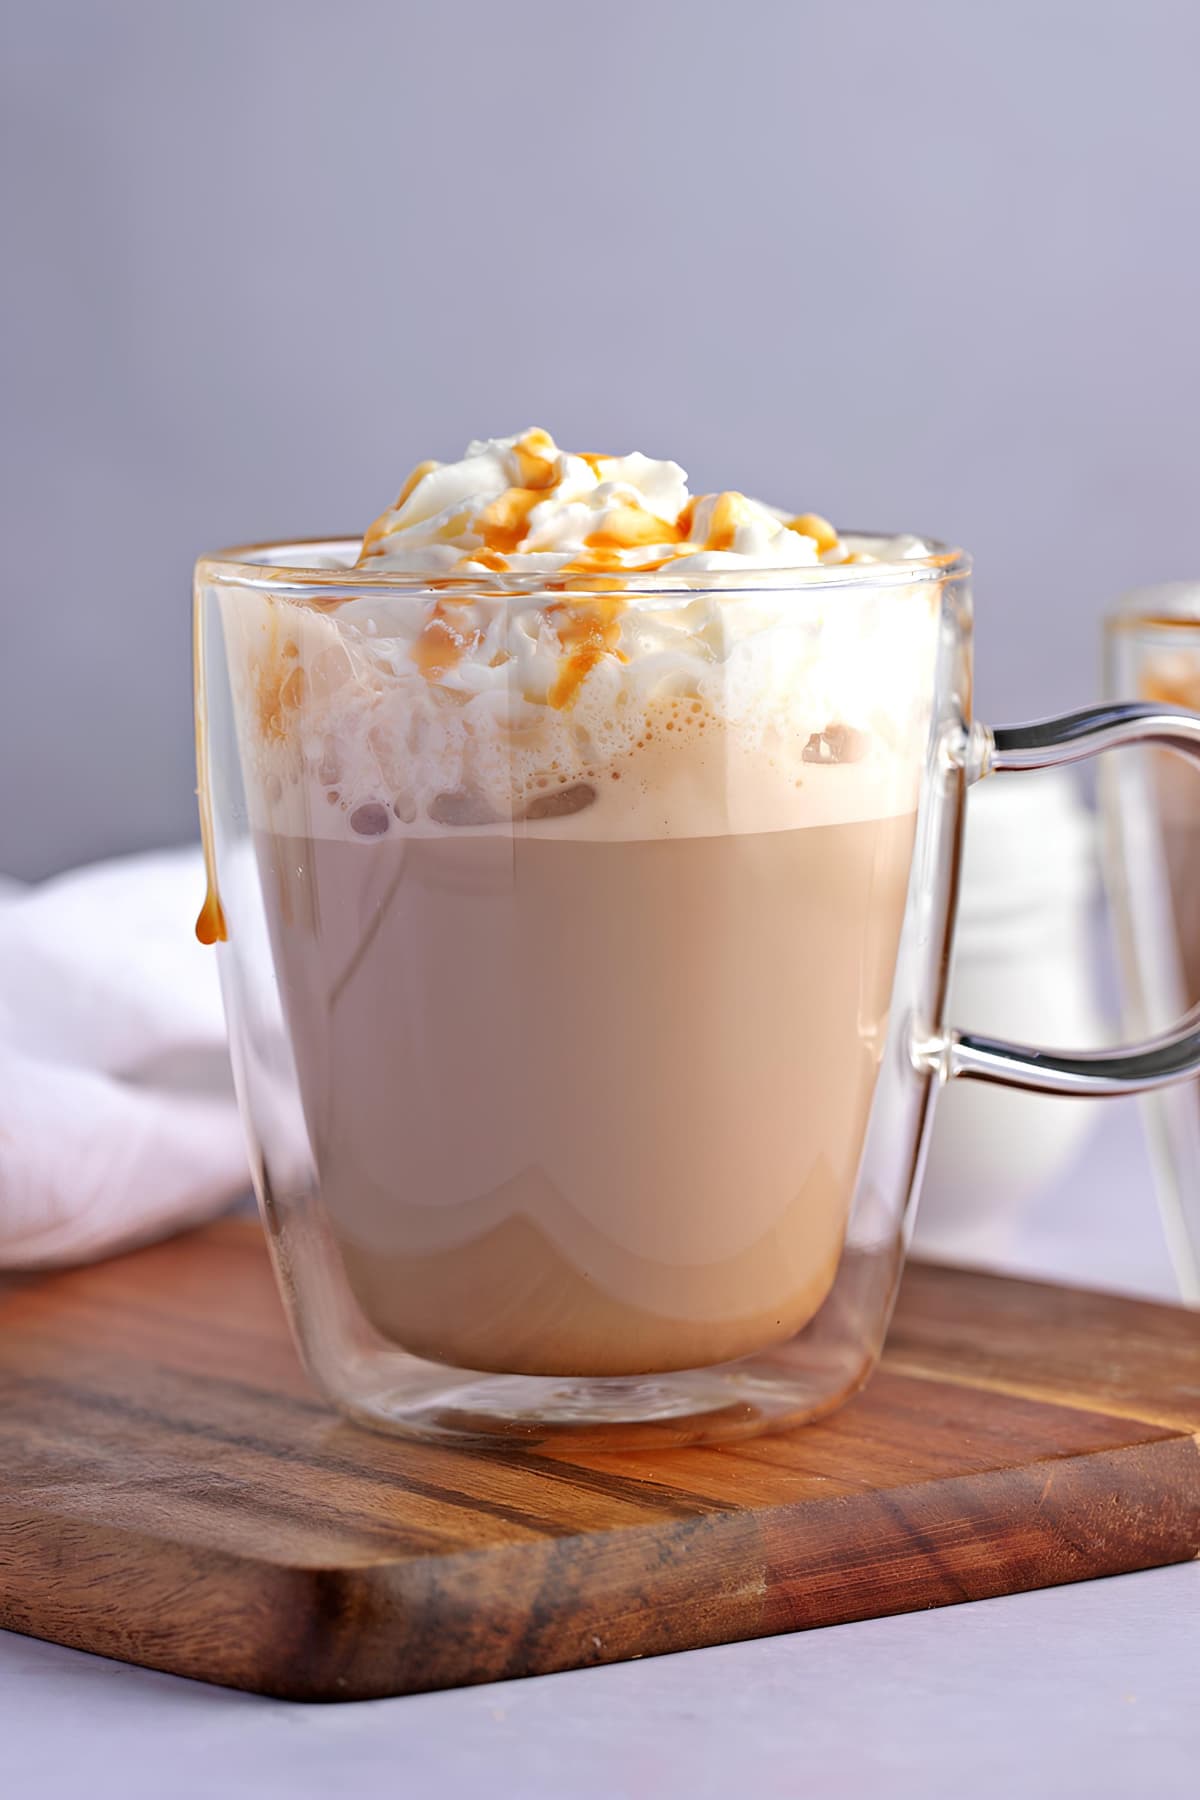 A glass mug with homemade caramel macchiato topped with whipped cream and drizzle of caramel syrup on a wooden cutting board- close up side view.